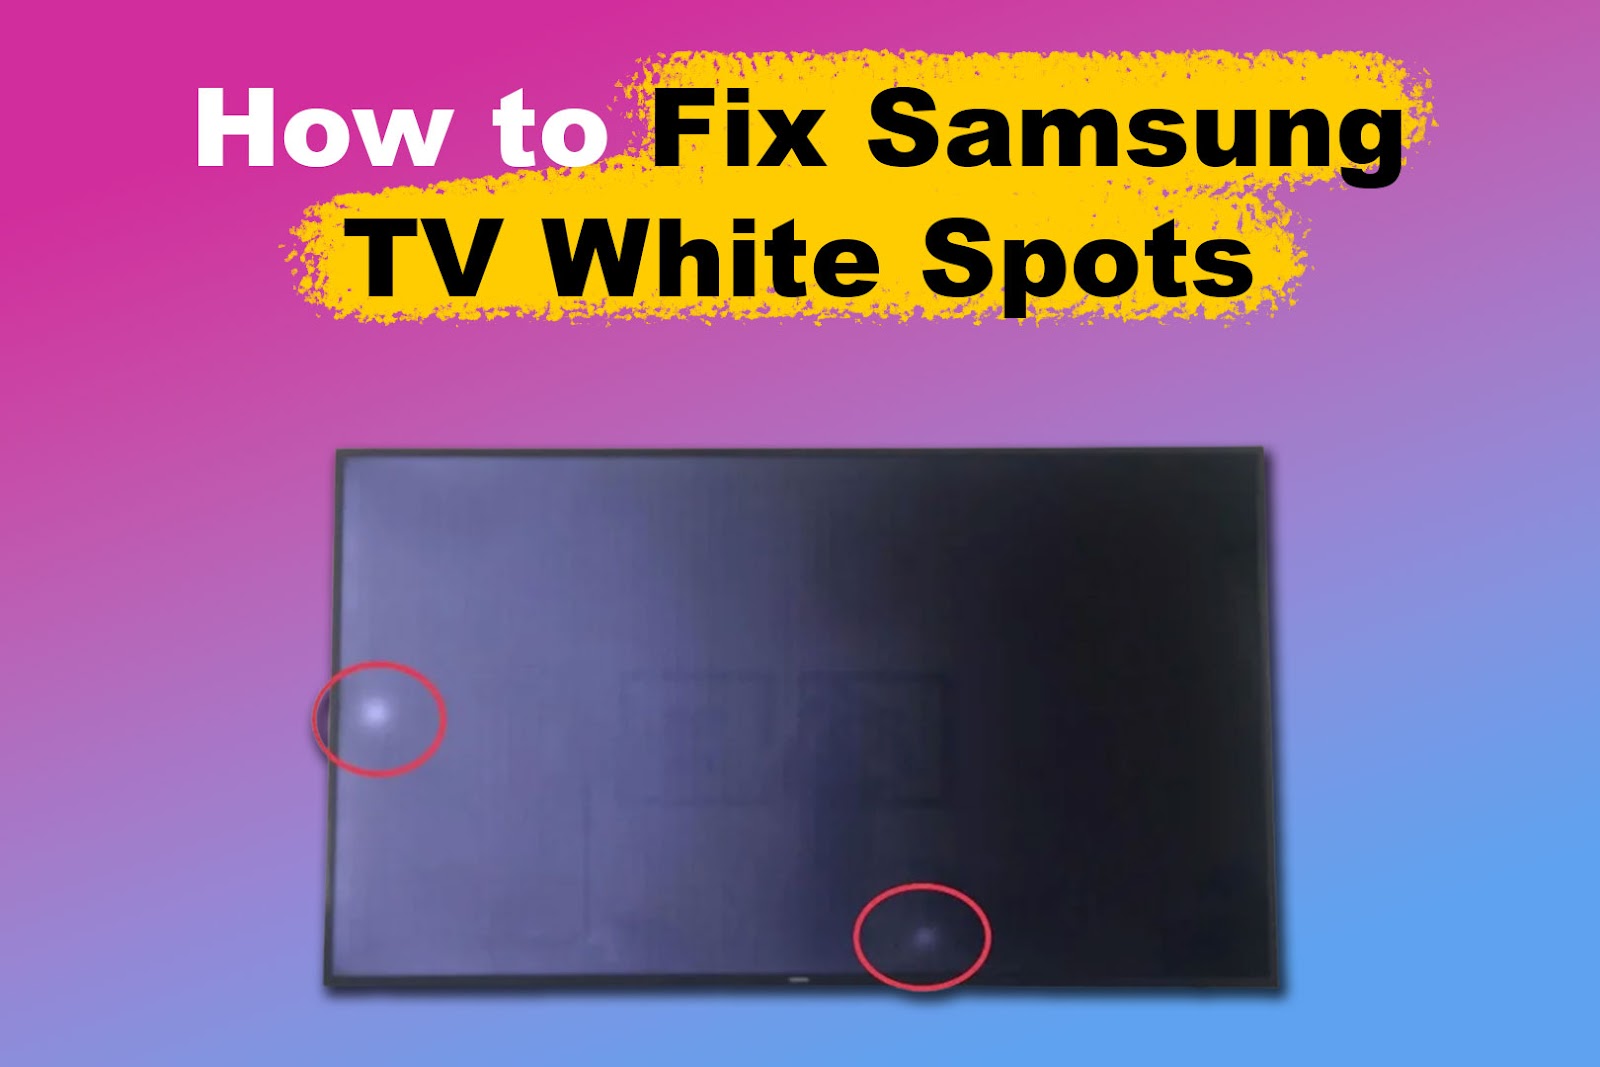 How to Fix Samsung TV White Spots